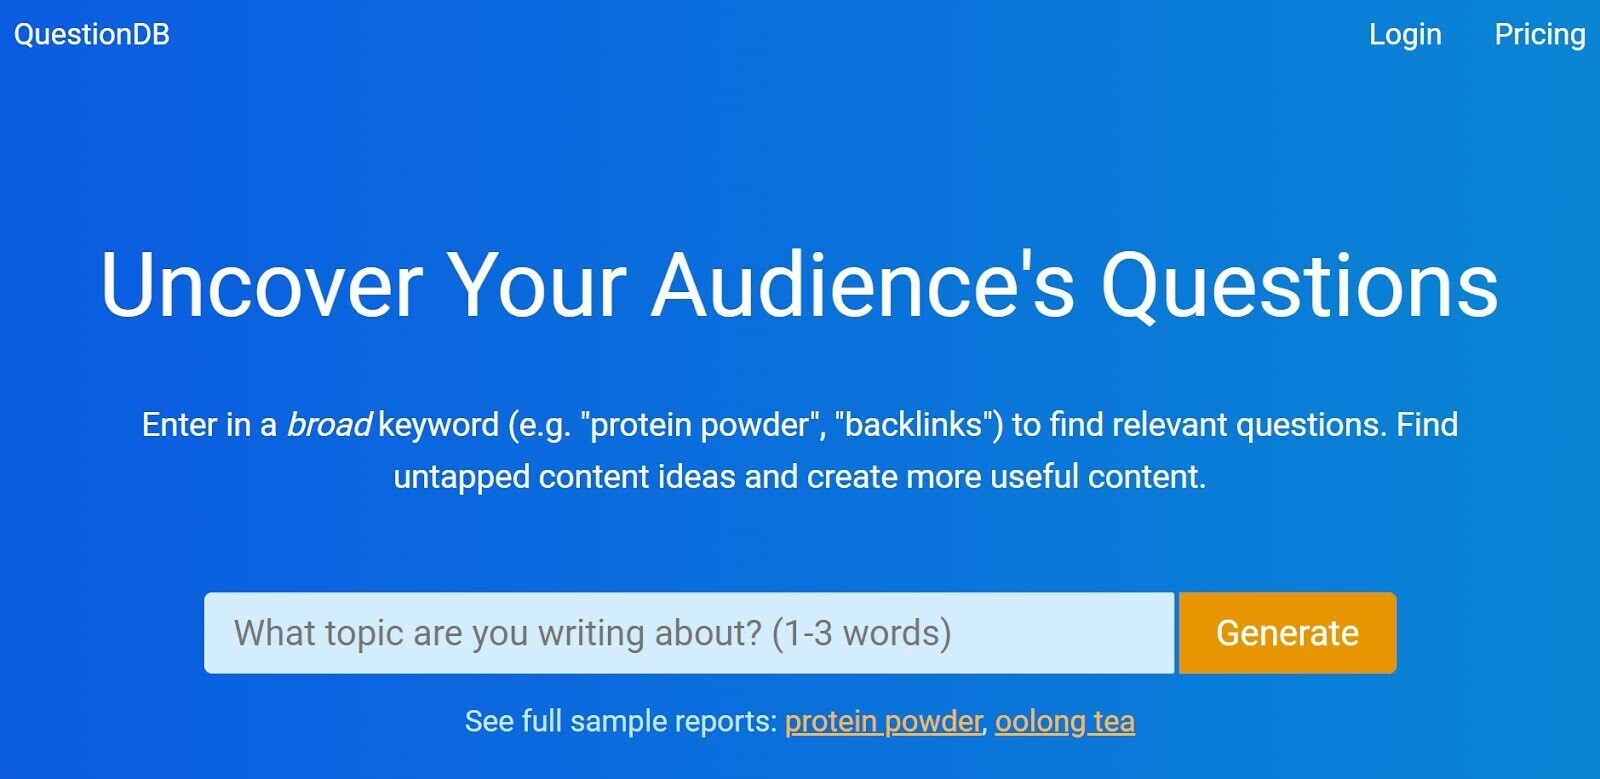 QuestionDB 主頁標題為“Uncover Your Audience's Questions”